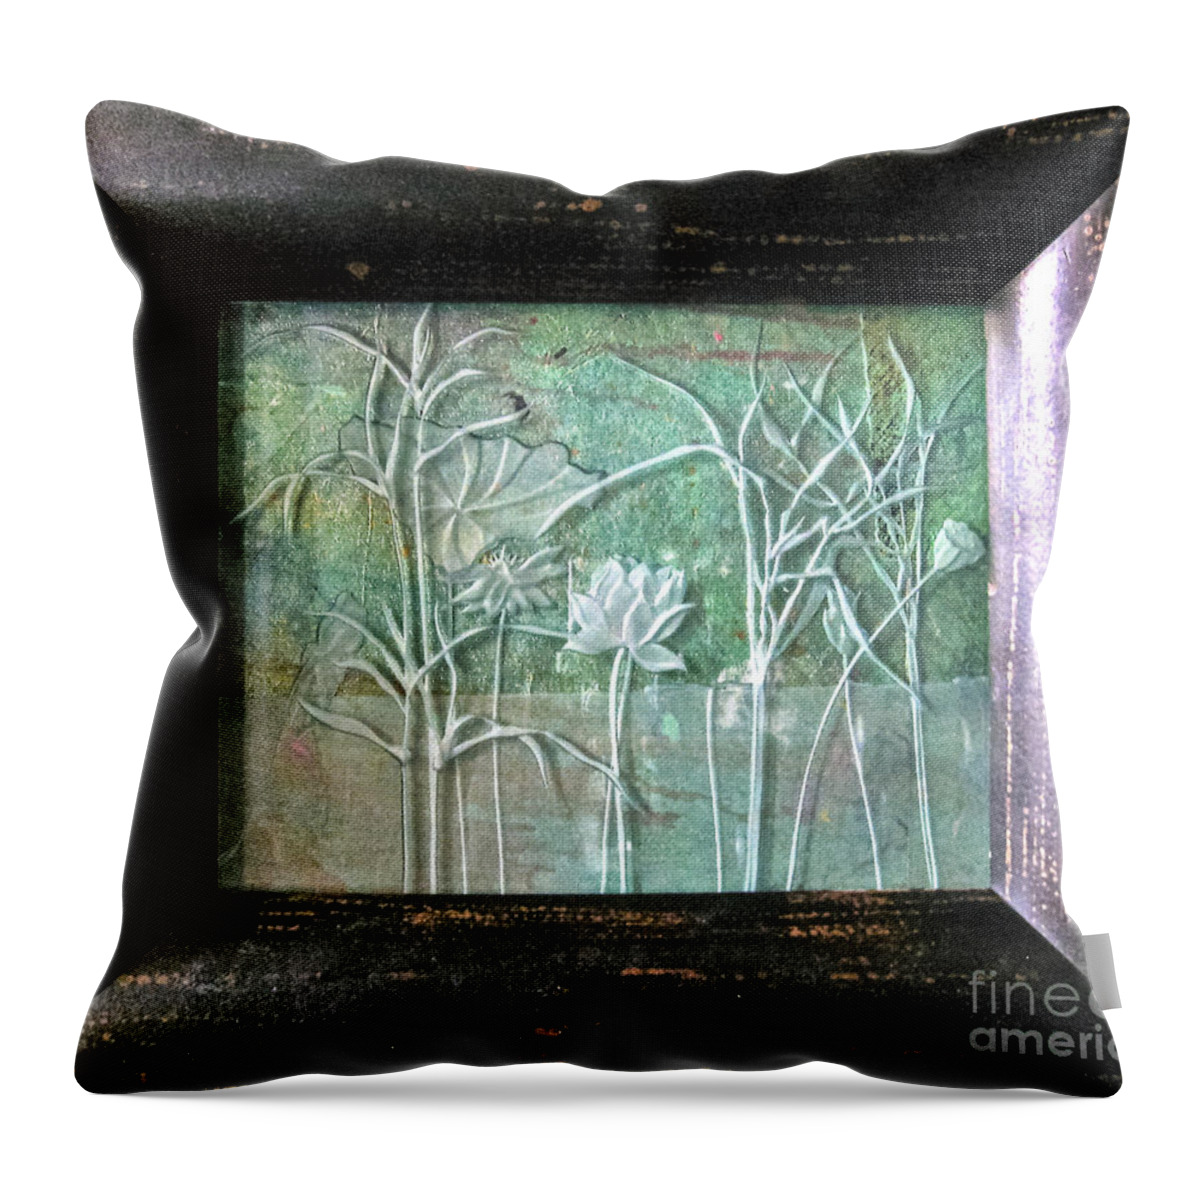 Plants Throw Pillow featuring the glass art Pond #1 by Alone Larsen